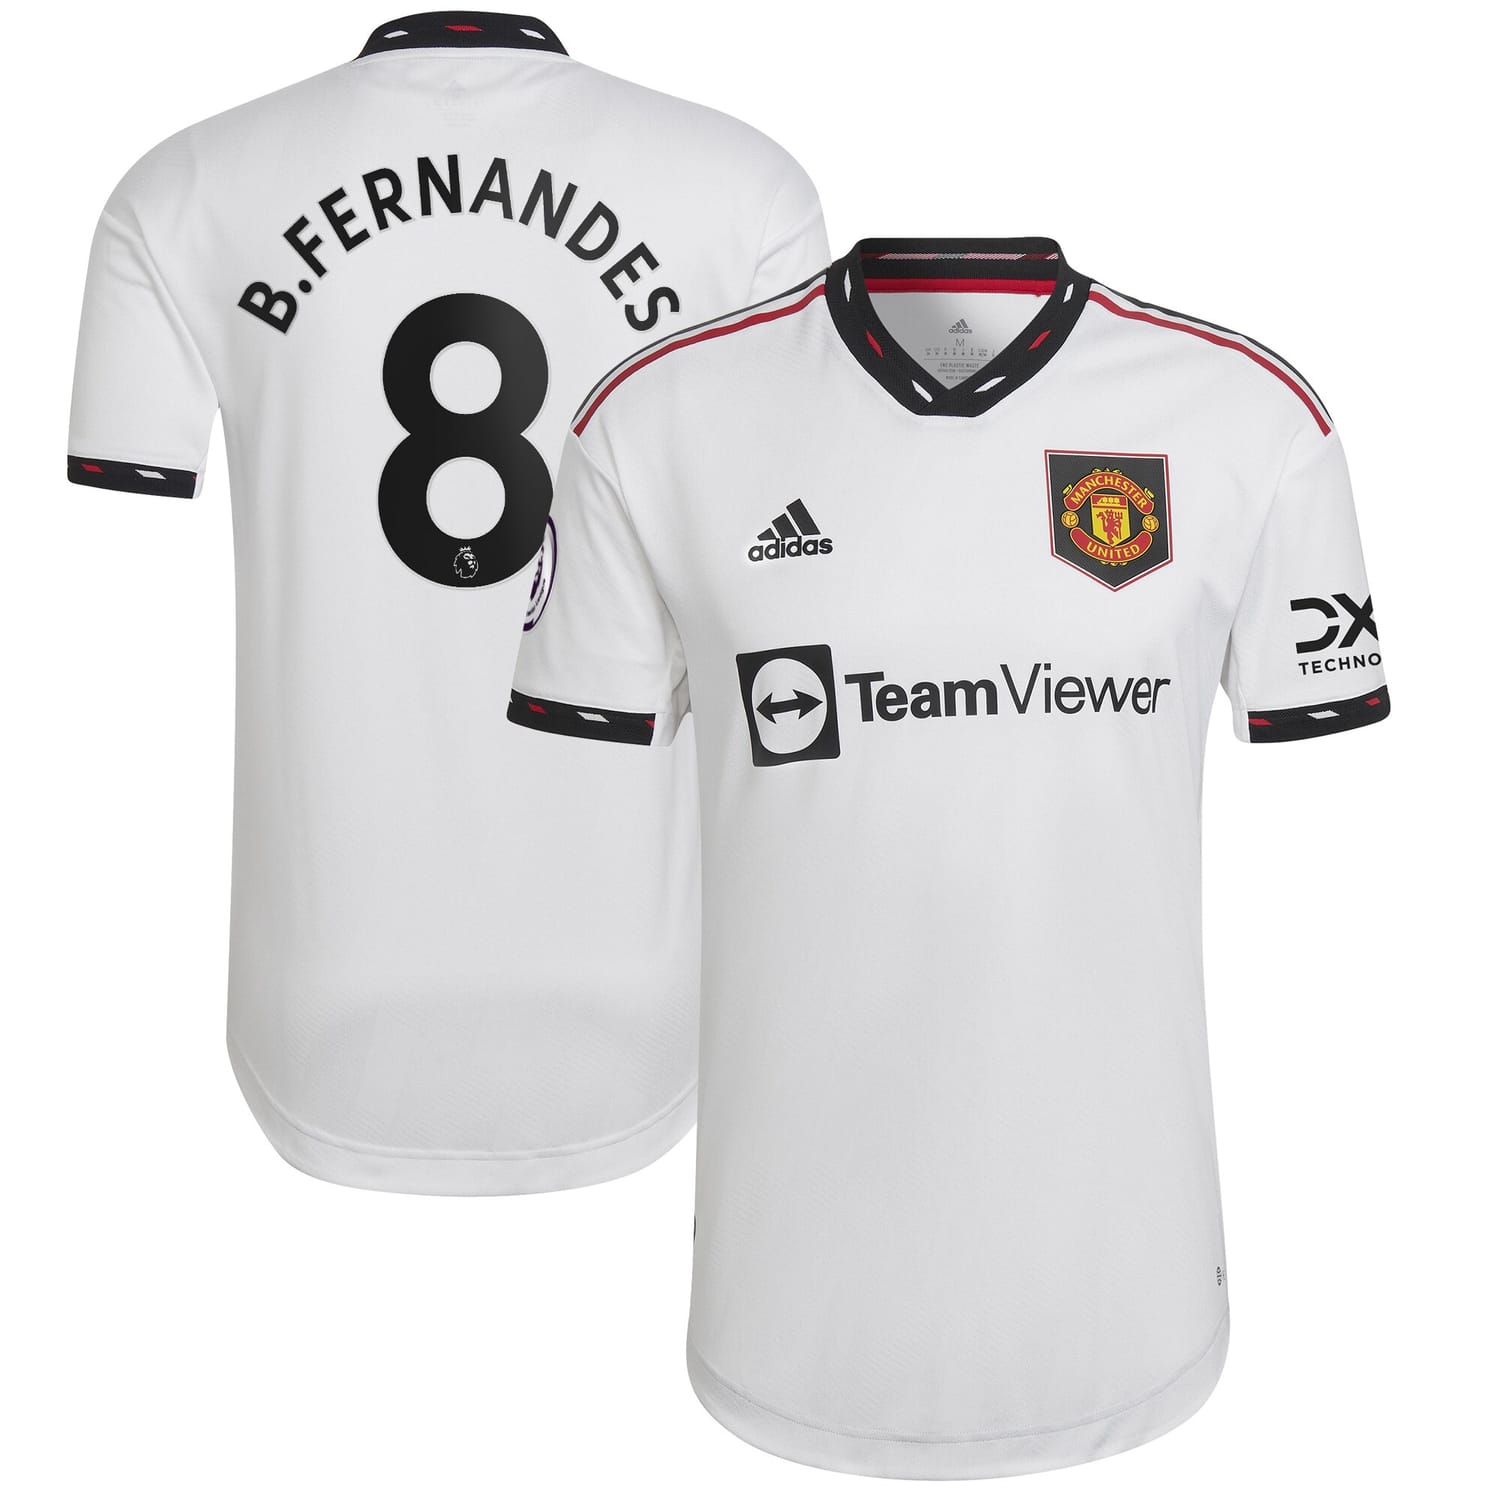 Premier League Manchester United Away Authentic Jersey Shirt White 2022-23 player Bruno Fernandes printing for Men